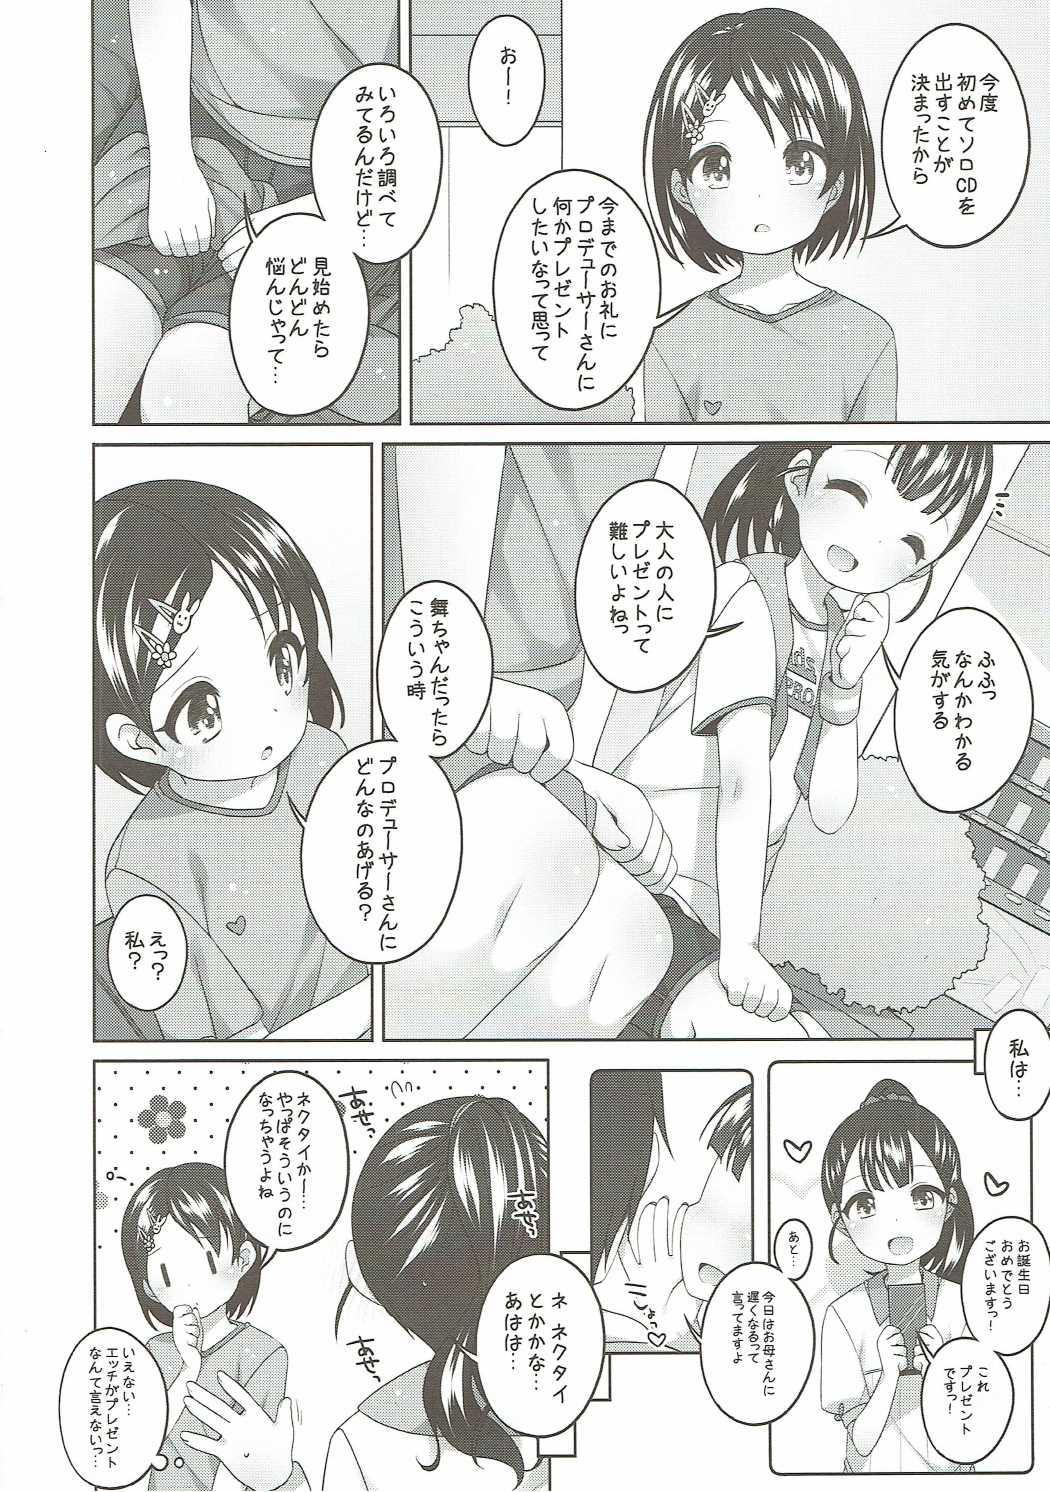 Dykes Ganbare! Chie-chan - The idolmaster Real Sex - Page 5